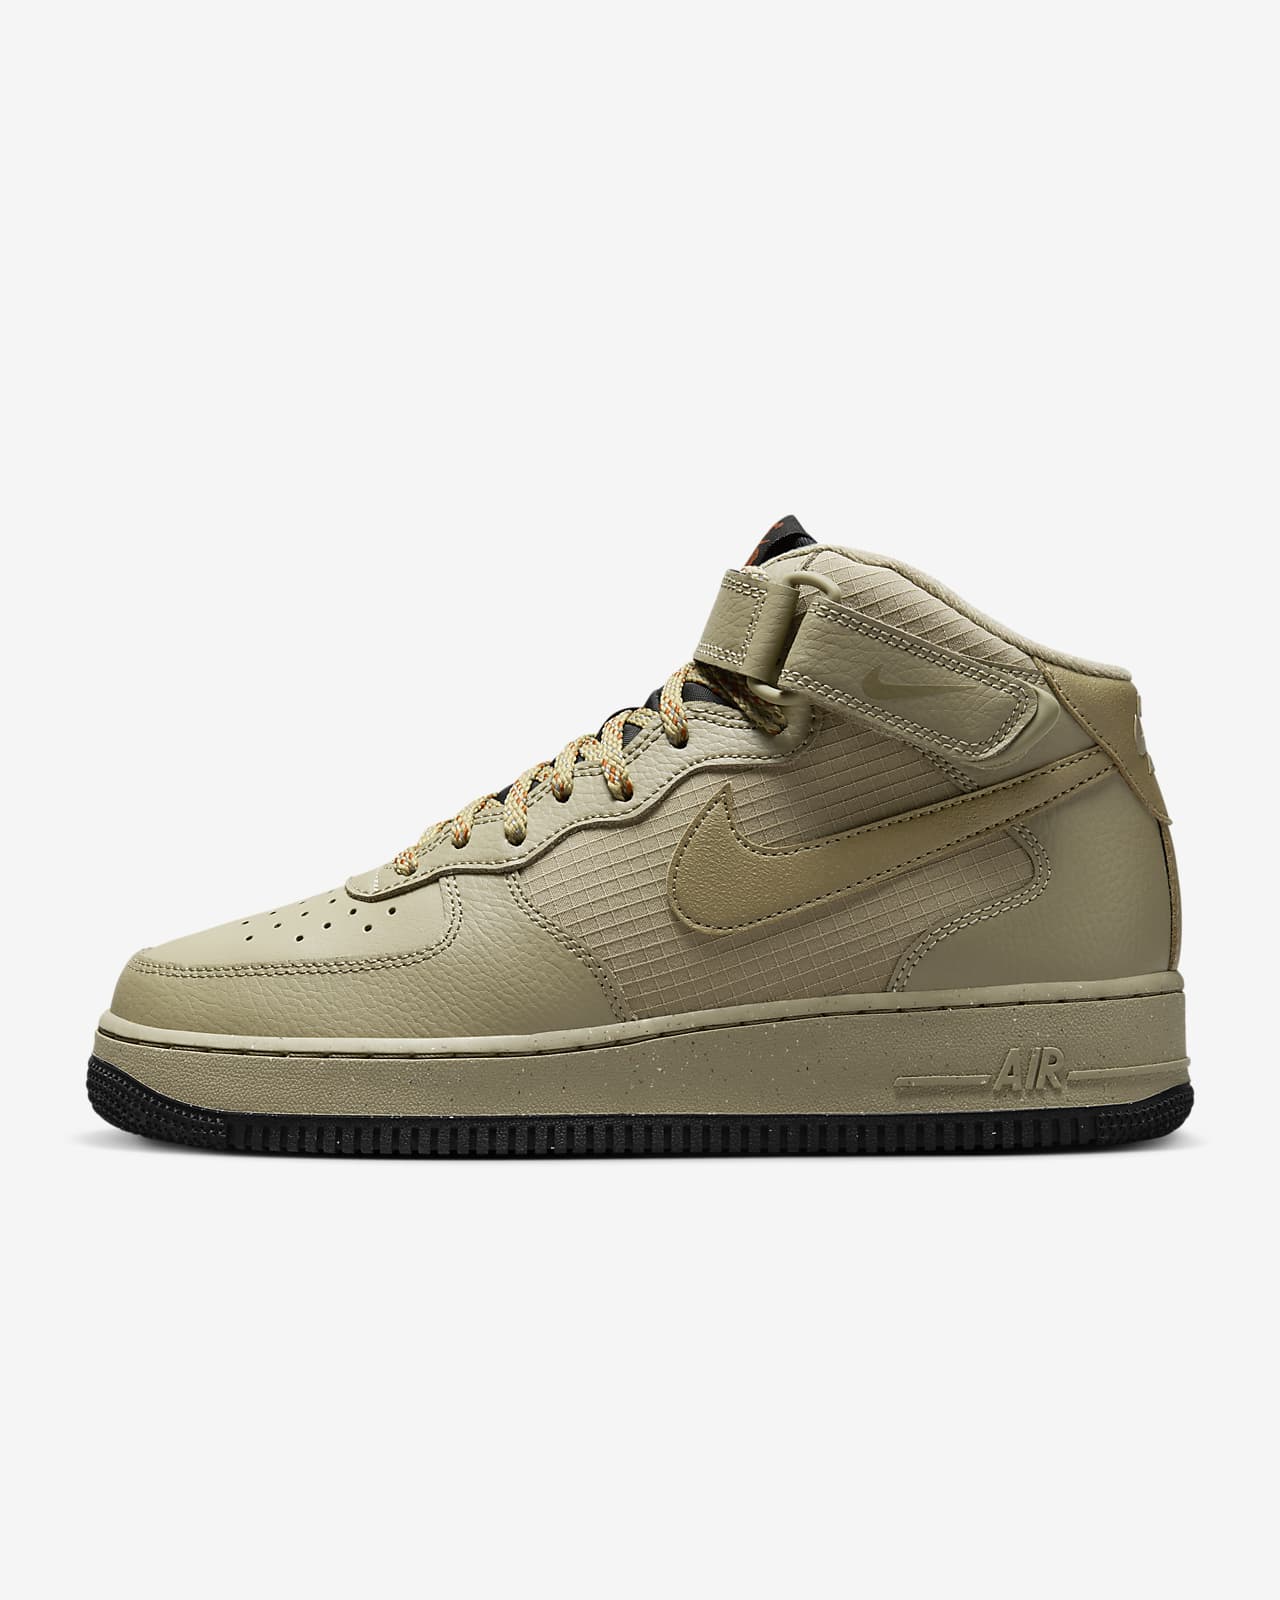 Nike Air Force 1 Mid 07 Mens Shoes Review